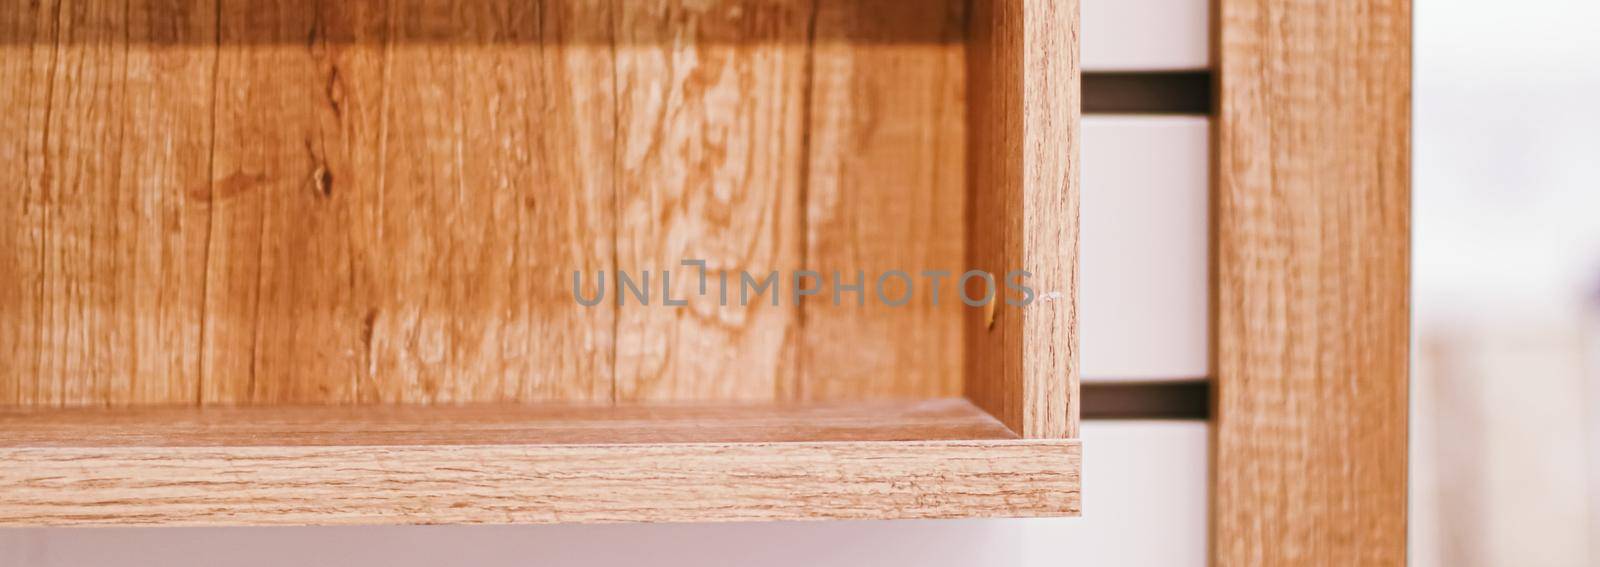 Empty wooden shelf, eco-friendly interior design and sustainable furniture materials concept